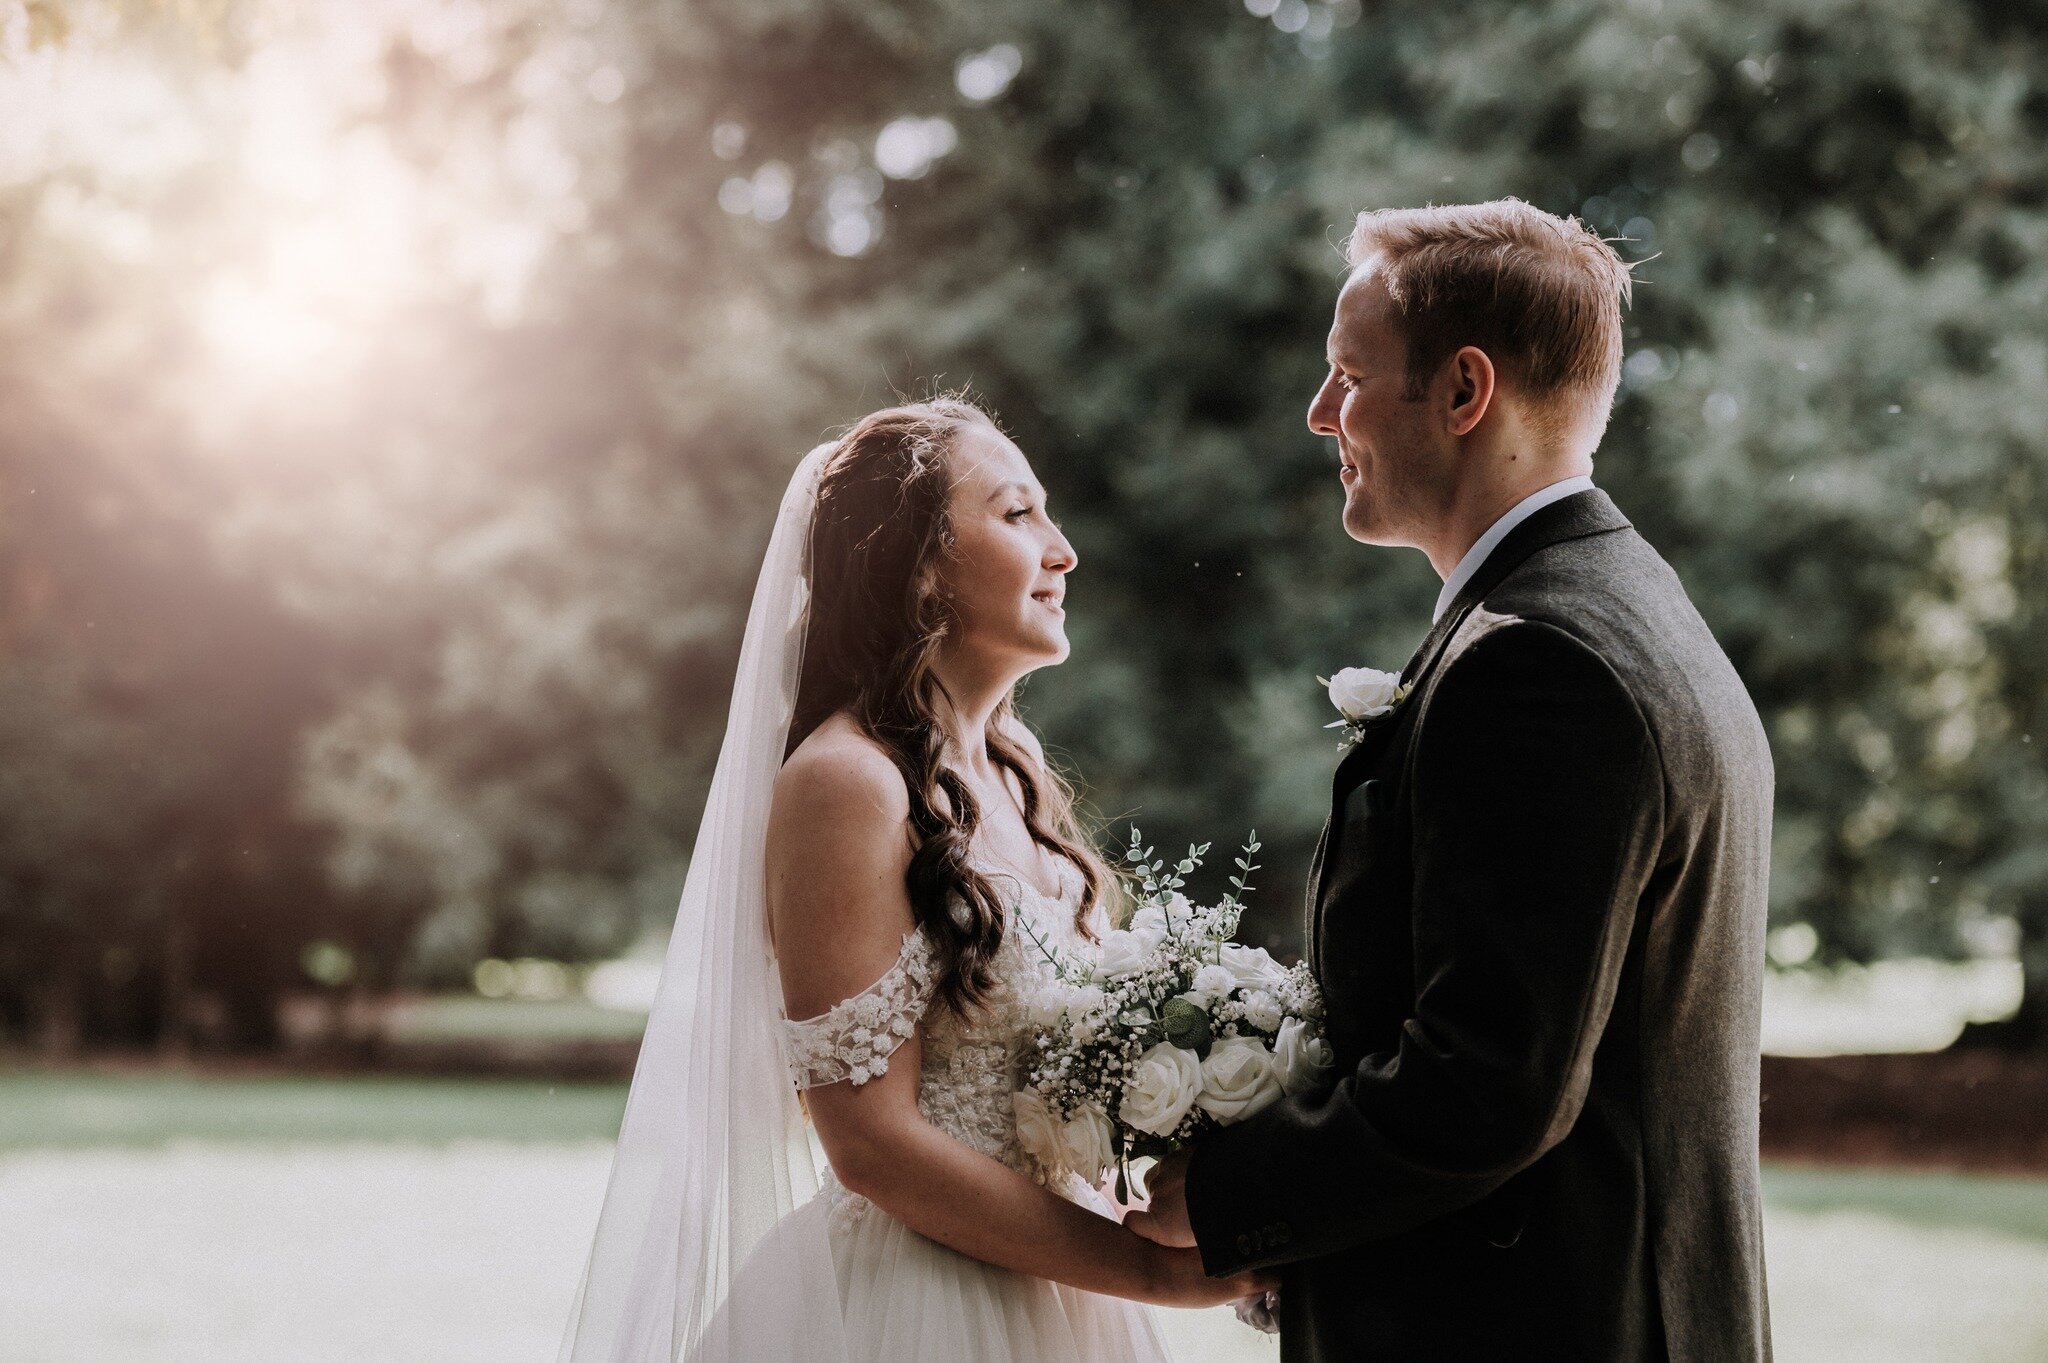 Sneak previews: Z&Ouml;E &amp; TIM 💕

Weekend of 2 beautiful weddings at Holmewood Hall so here's the first...

Take a beautiful sunny yet chilly day, a stunning venue, and a glorious sunset and we get a fabulous wedding day!  So much love for this 